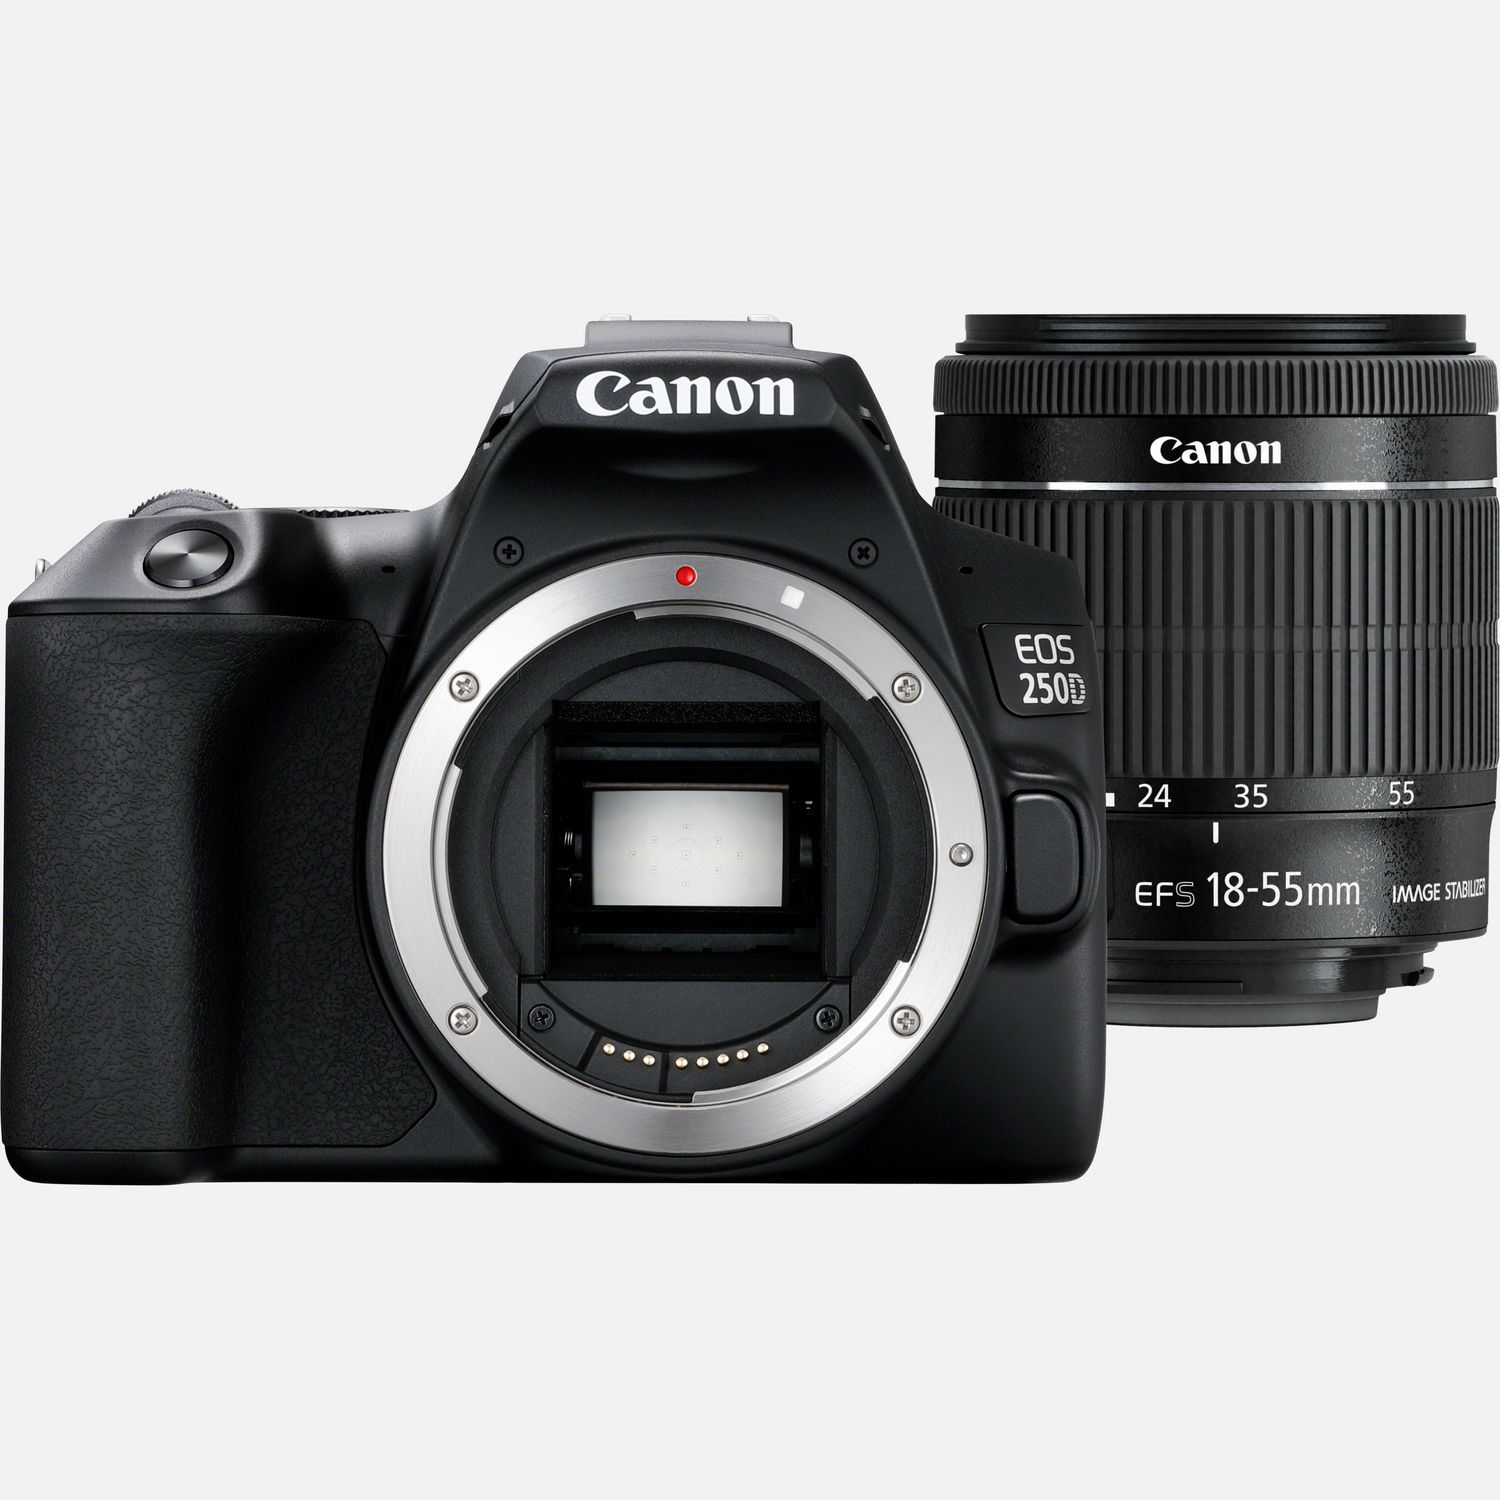 Buy Canon EF-S Store Lens Black — Wi-Fi Canon 250D f/4-5.6 + in 18-55mm EOS STM Body, IS OY Cameras